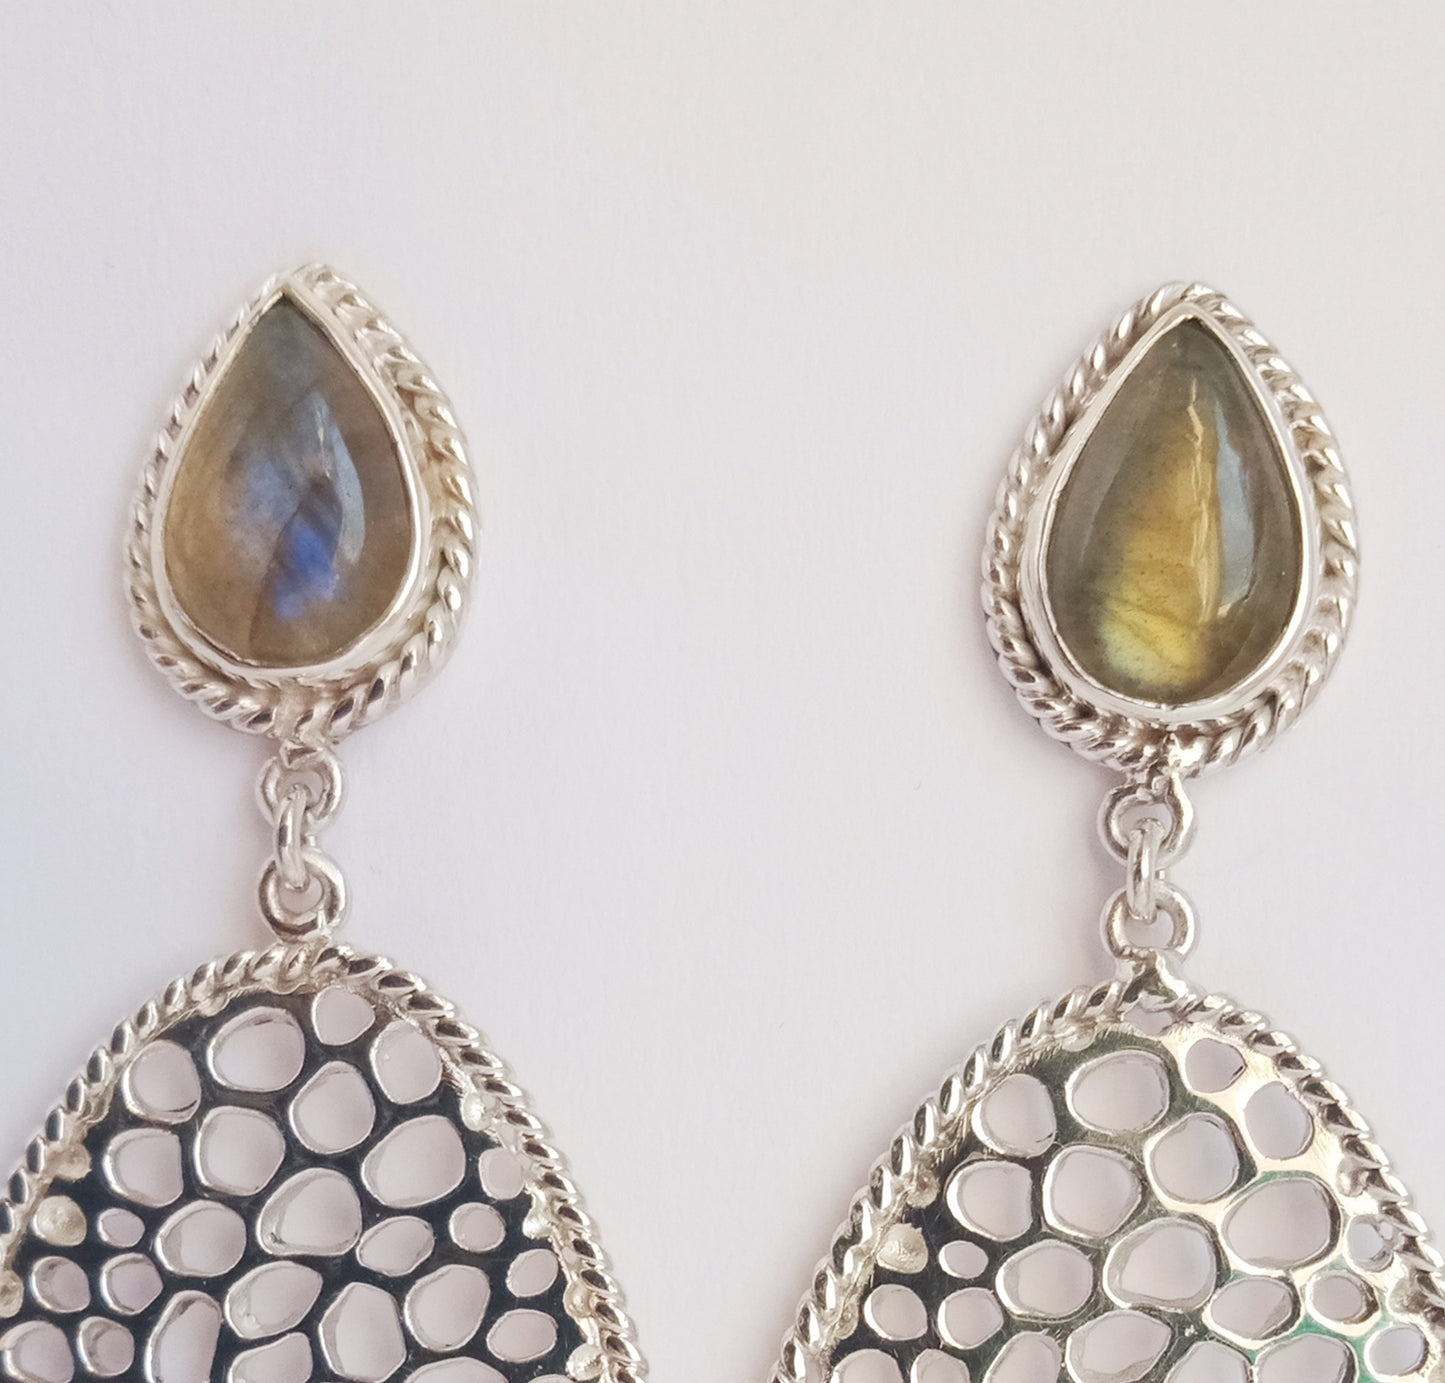 Labyrinth Labradorite Drops in Sterling Silver 925